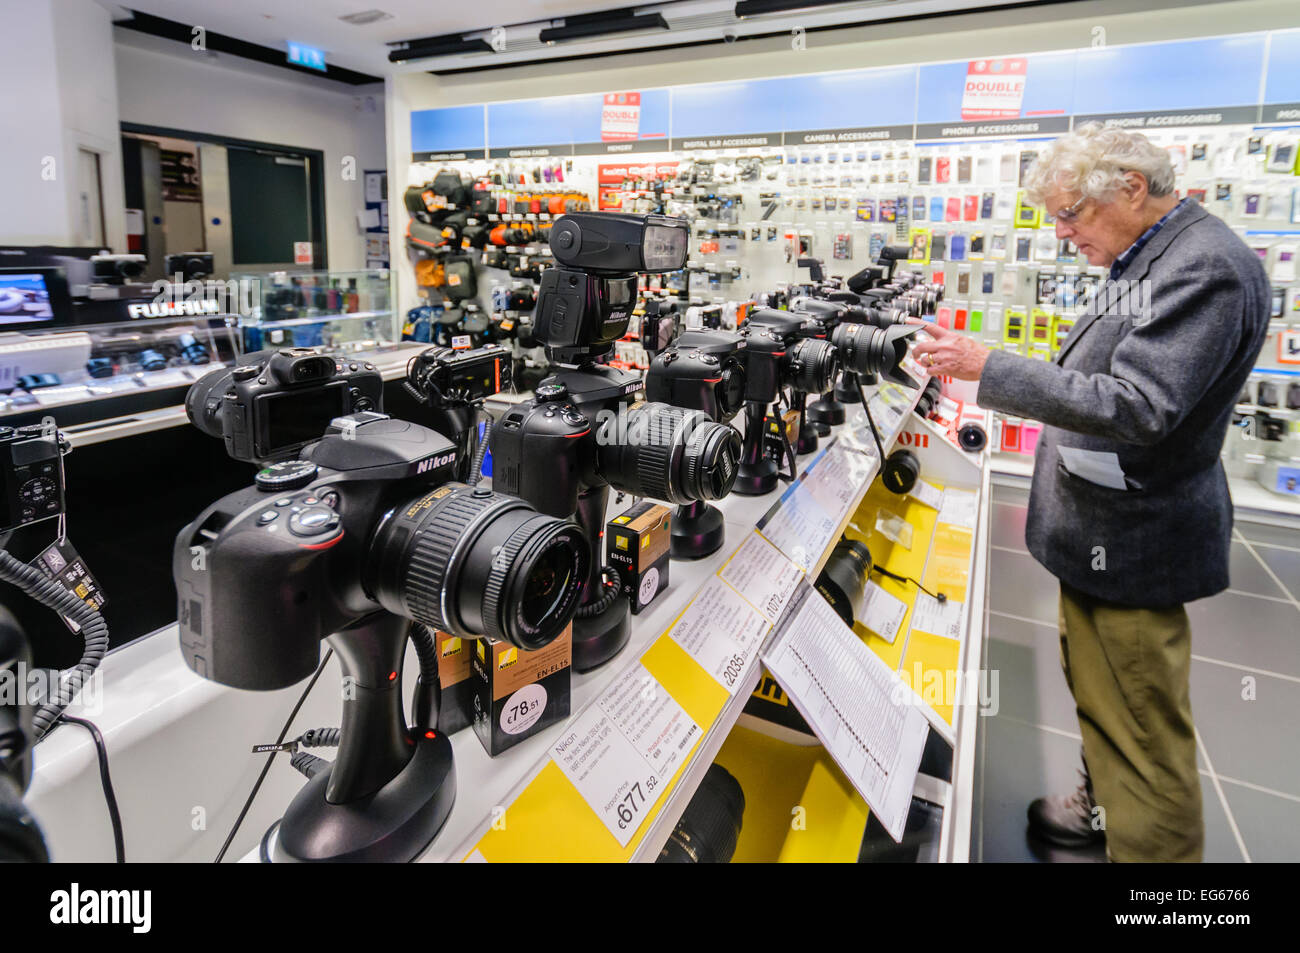 A man looks at cameras for sale in an electronics shop at an airport Stock Photo